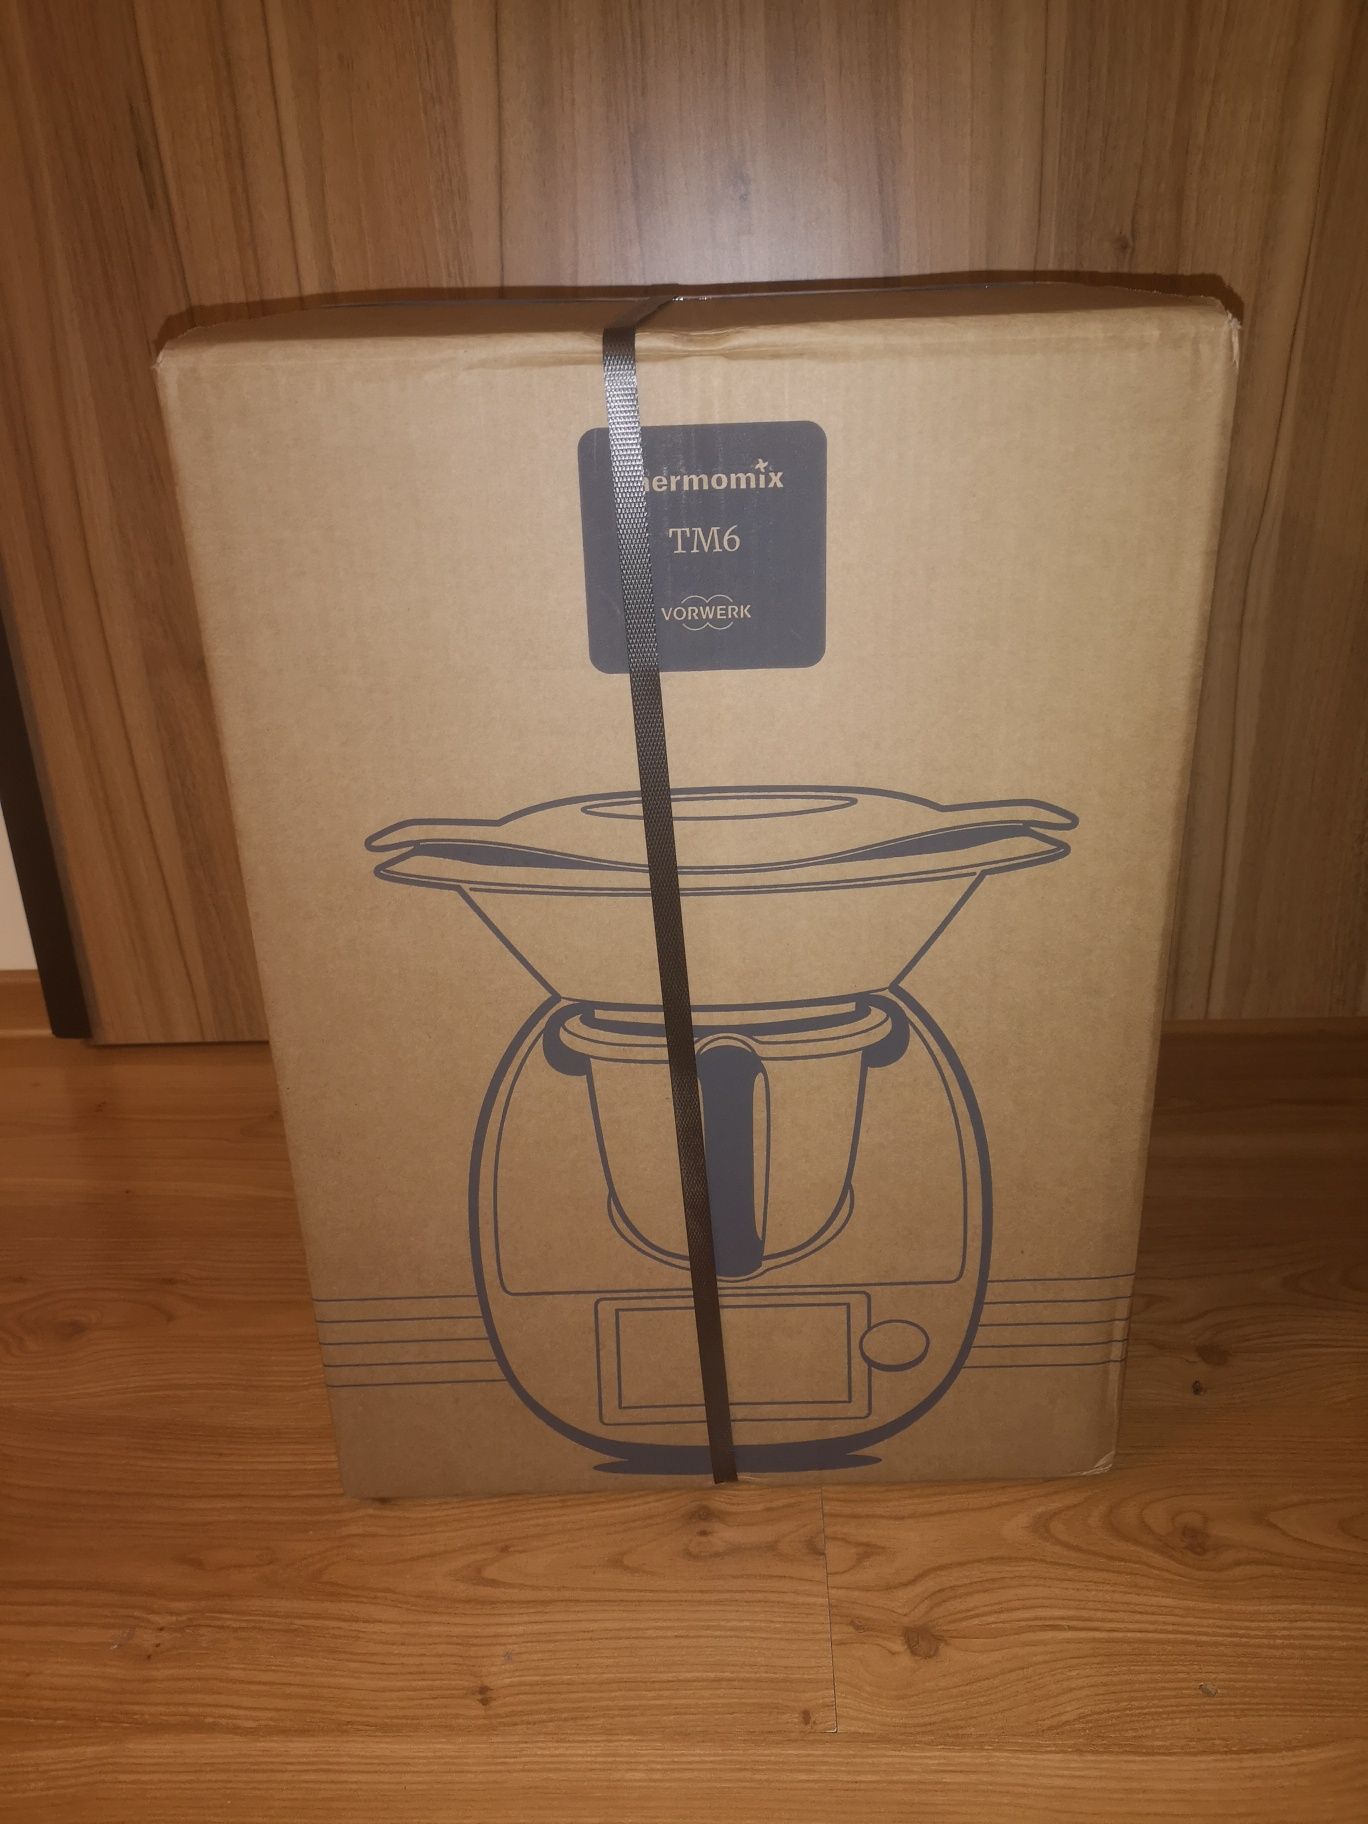 Thermomix Tm6 nowy